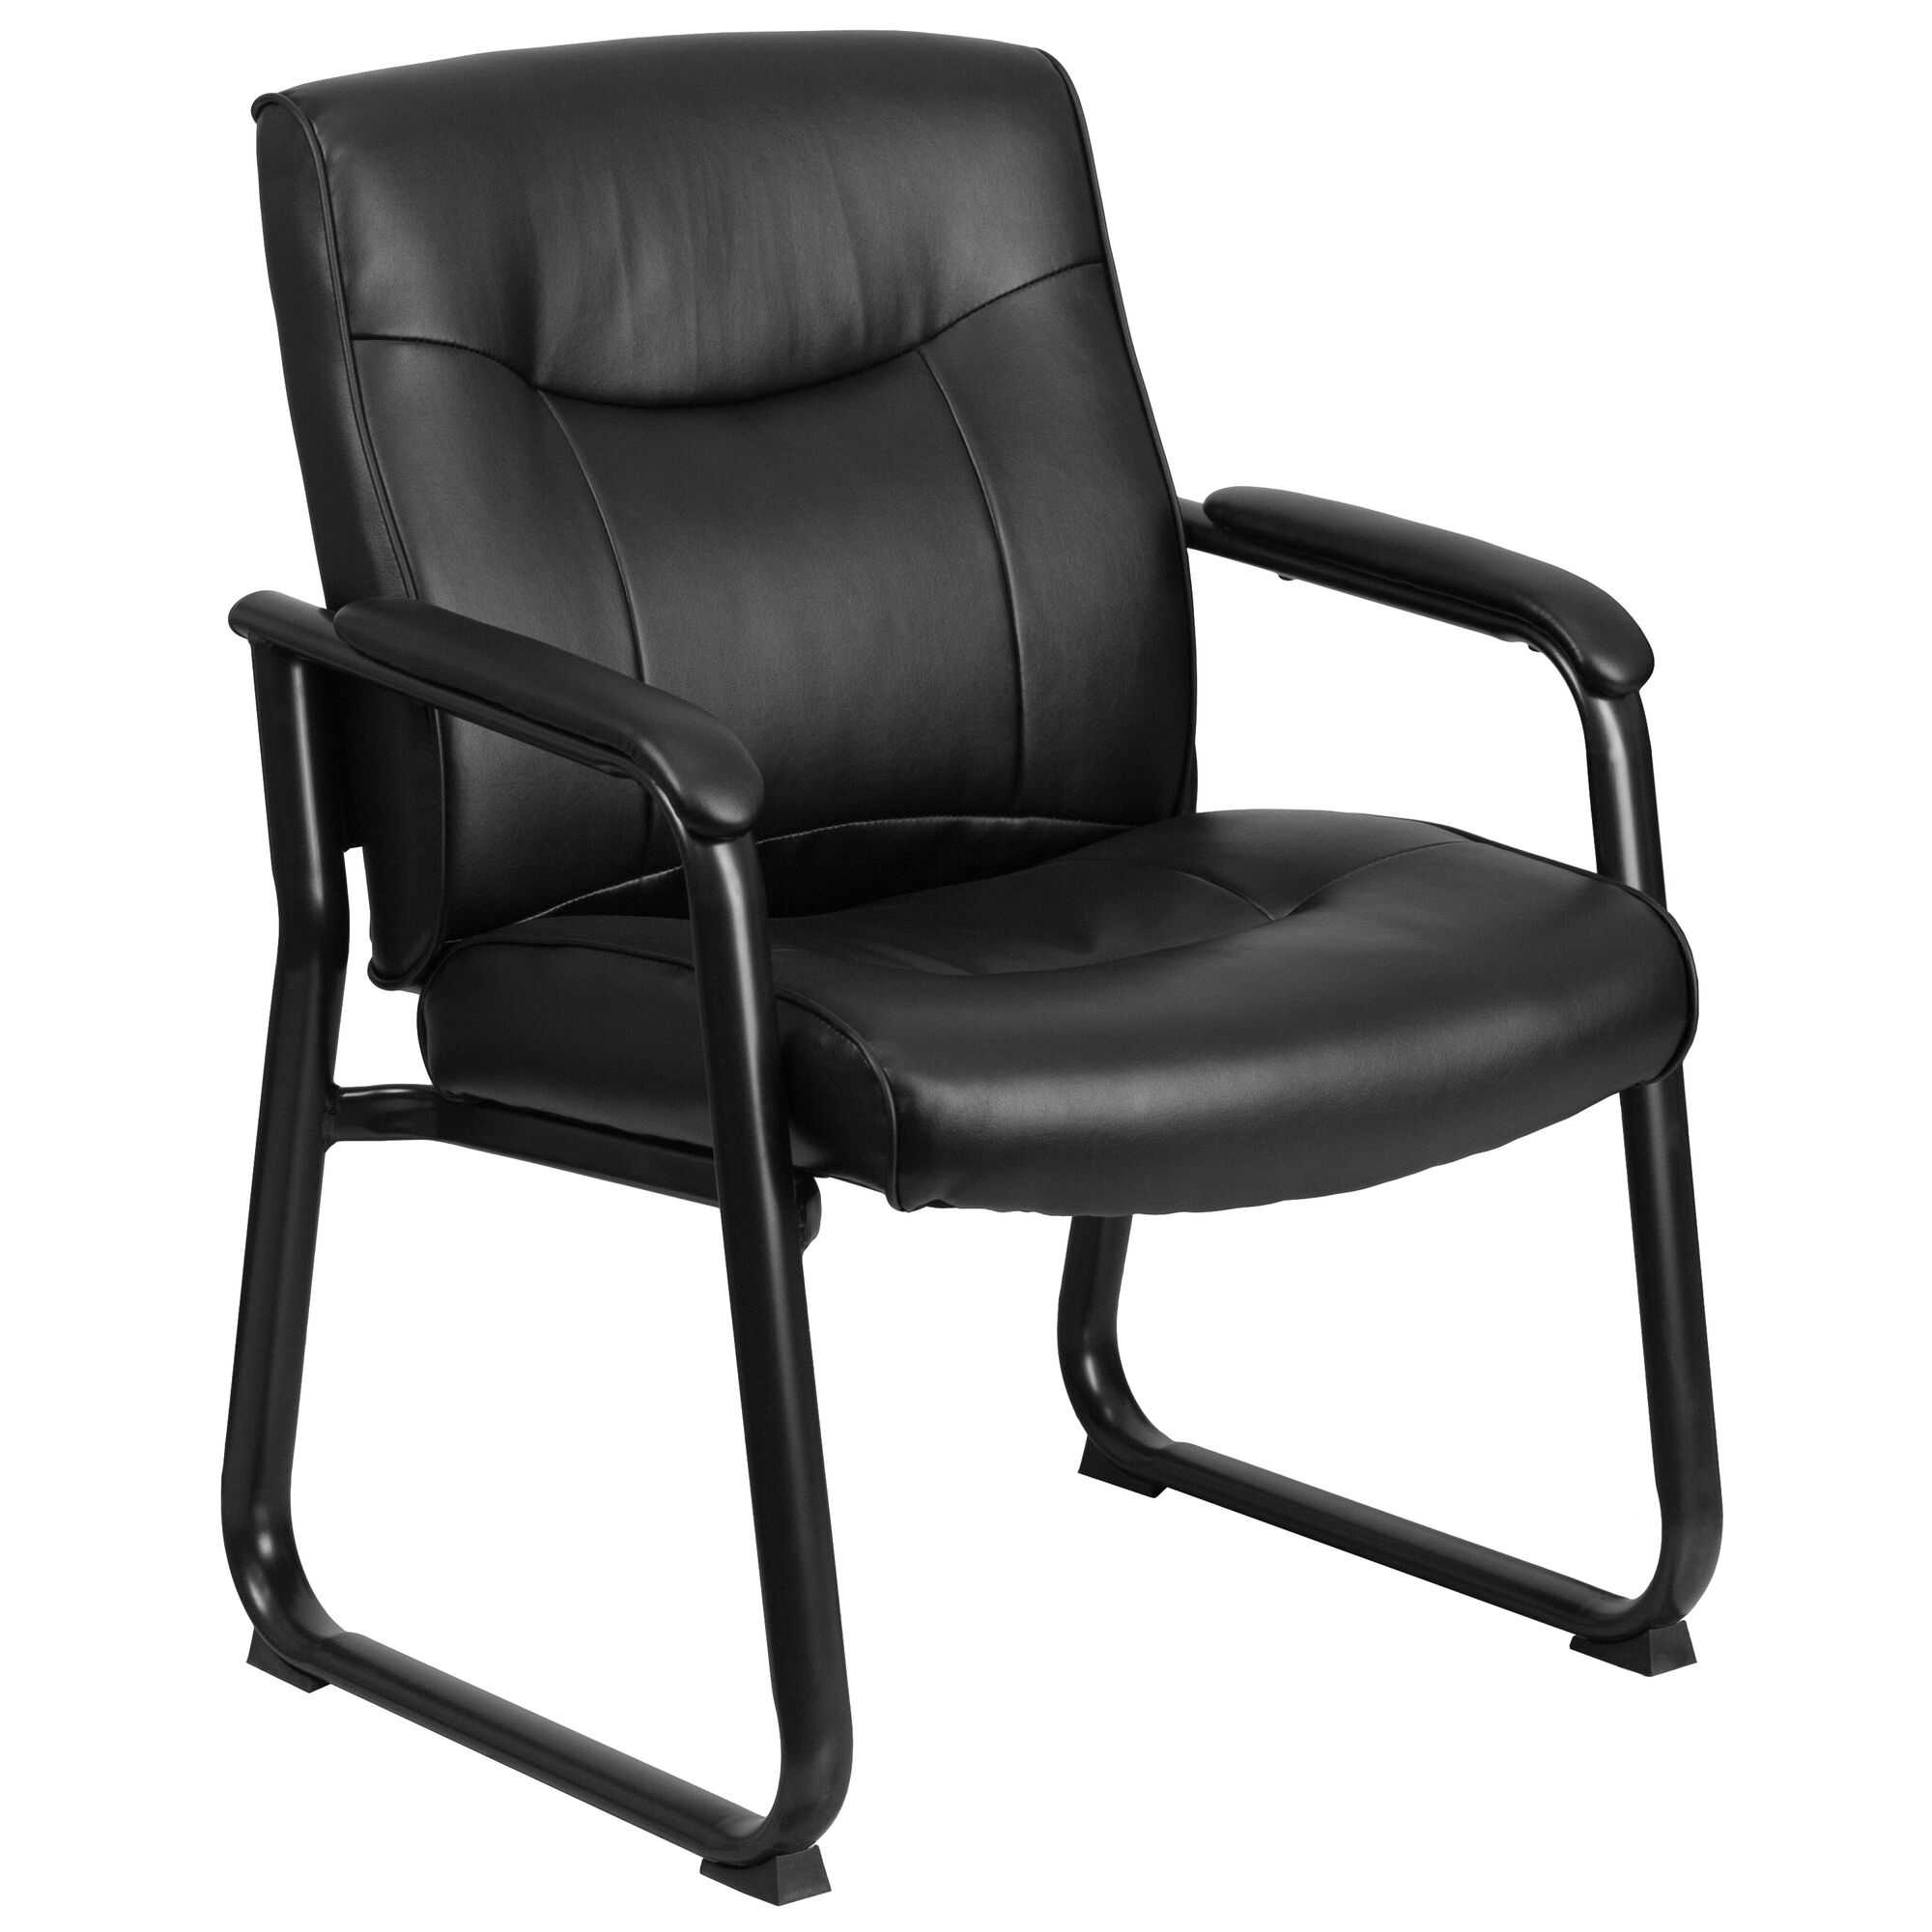 Flash Furniture HERCULES Series Big & Tall 500 lb. Rated Black LeatherSoft Executive Side Reception Chair with Sled Base, GO-2136-GG